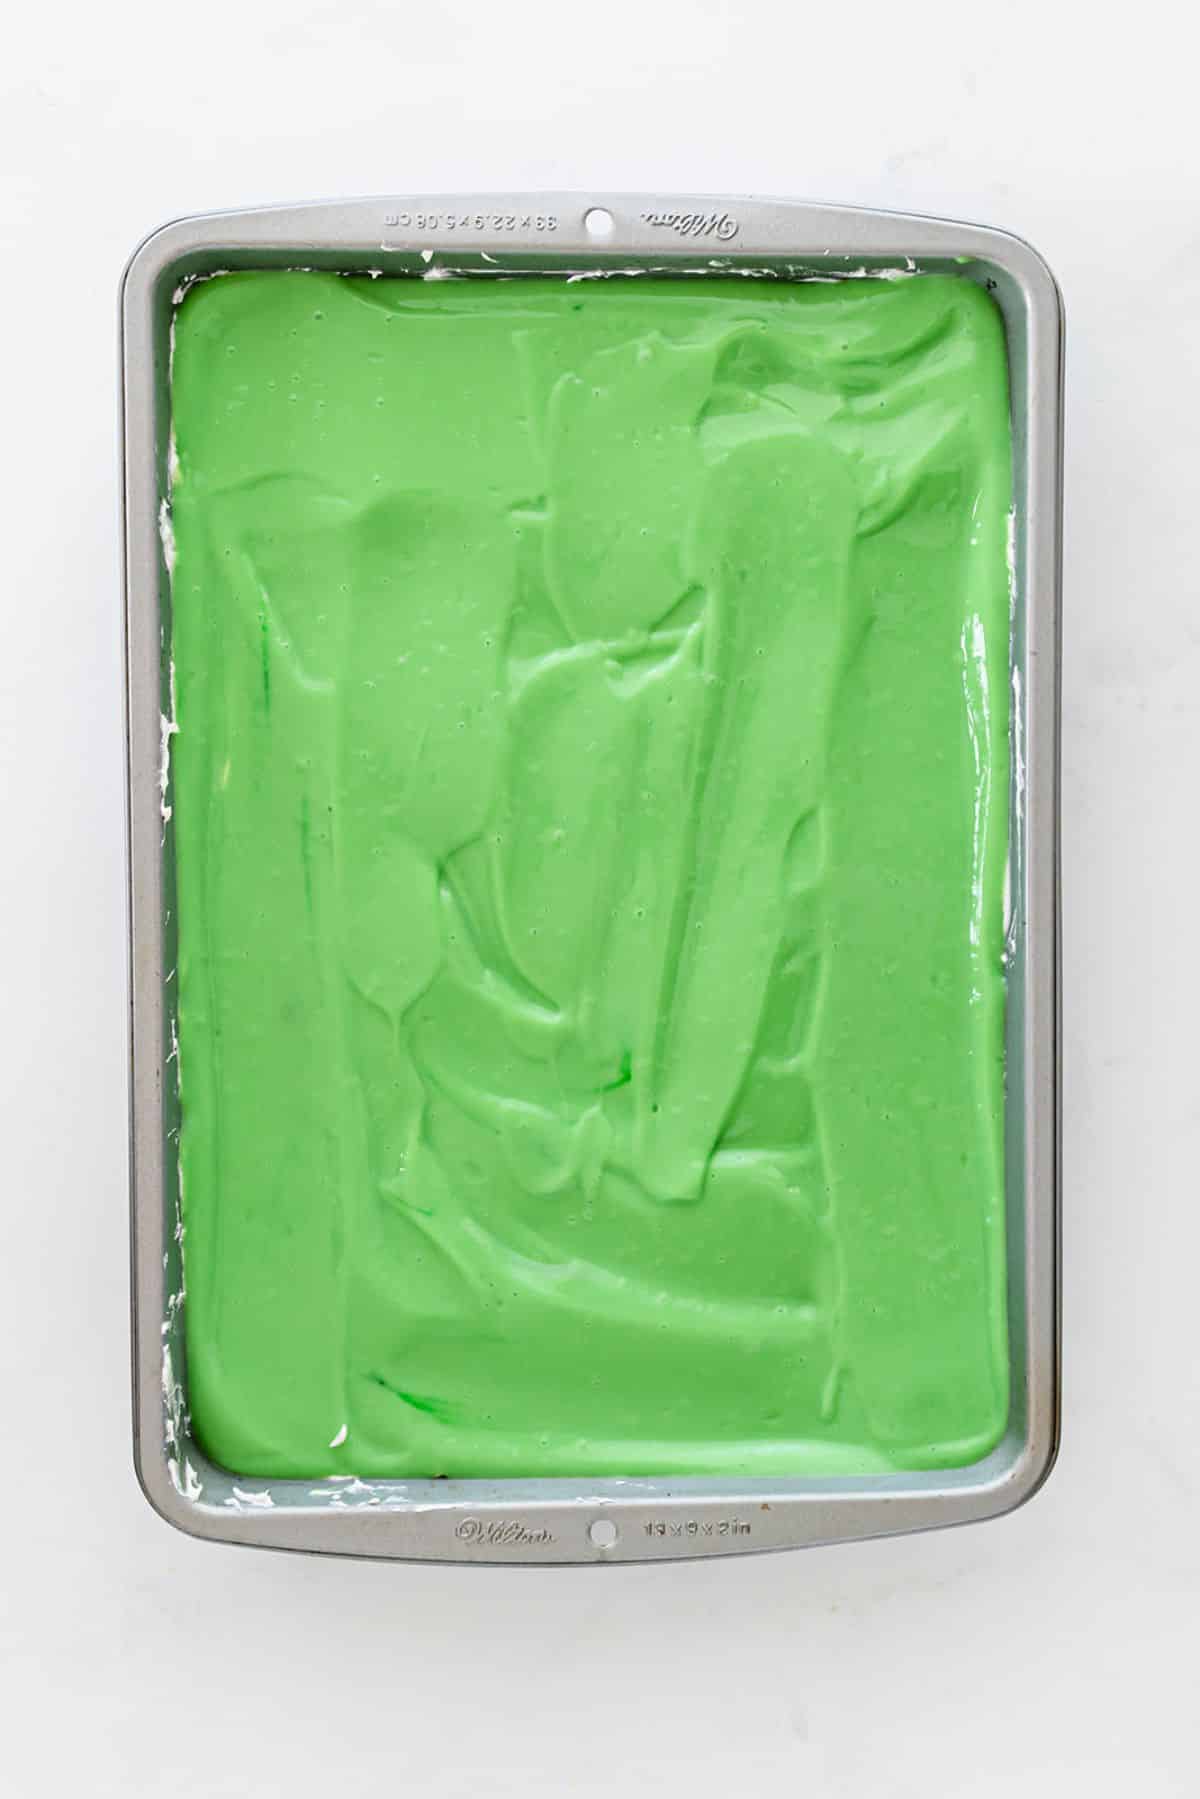 A layer of green pudding is spread over the cream cheese layer.